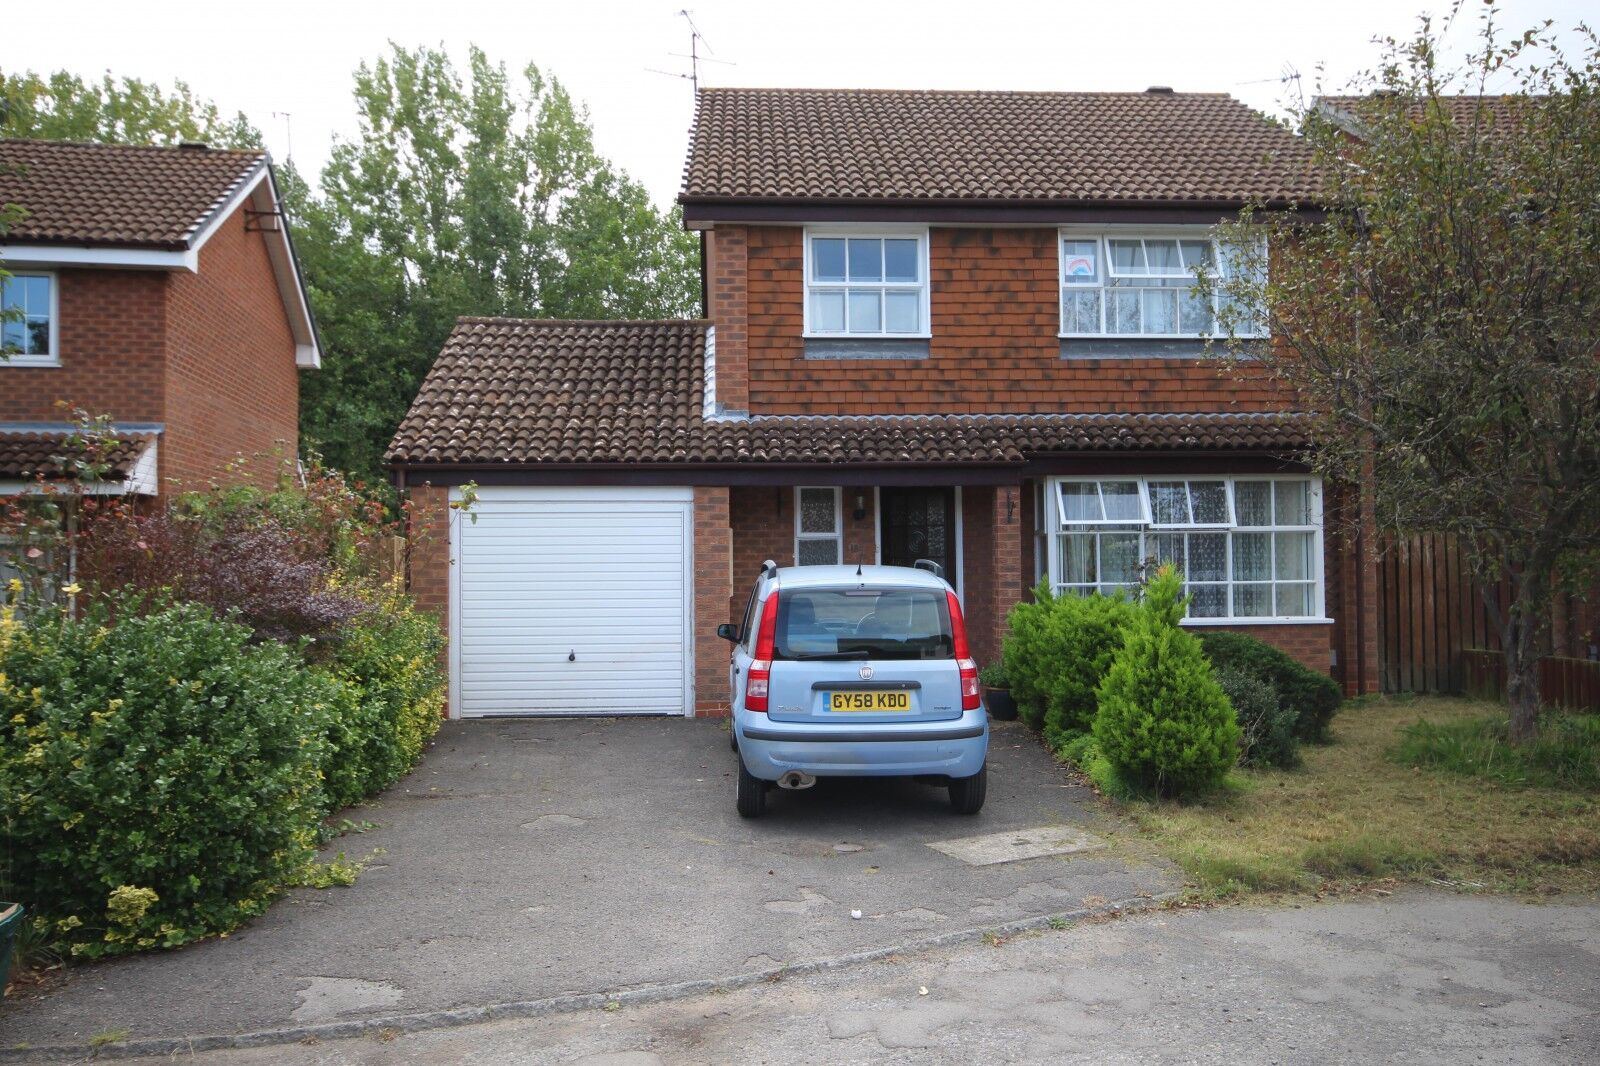 4 bedroom detached house for sale Old Farm Close, Abingdon, OX14, main image